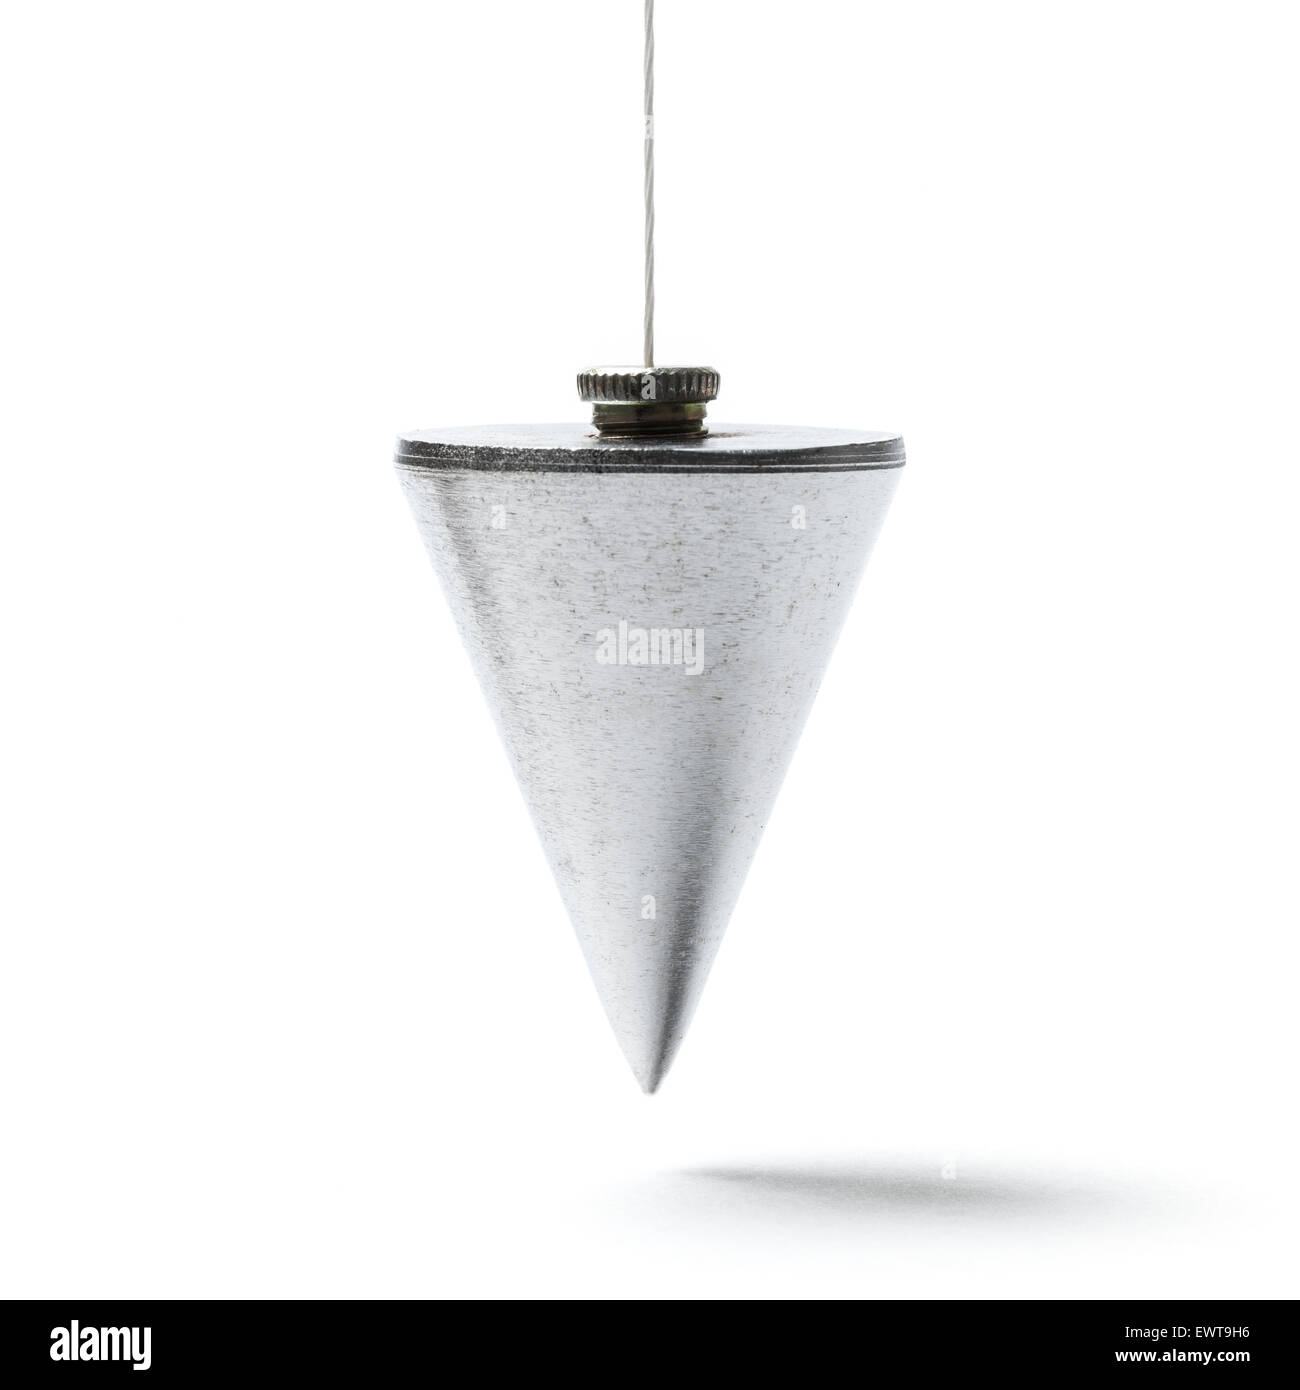 Metal plummet in the form of a cone hanged on a cord. Image is scuare and the object is isolated on white. Stock Photo